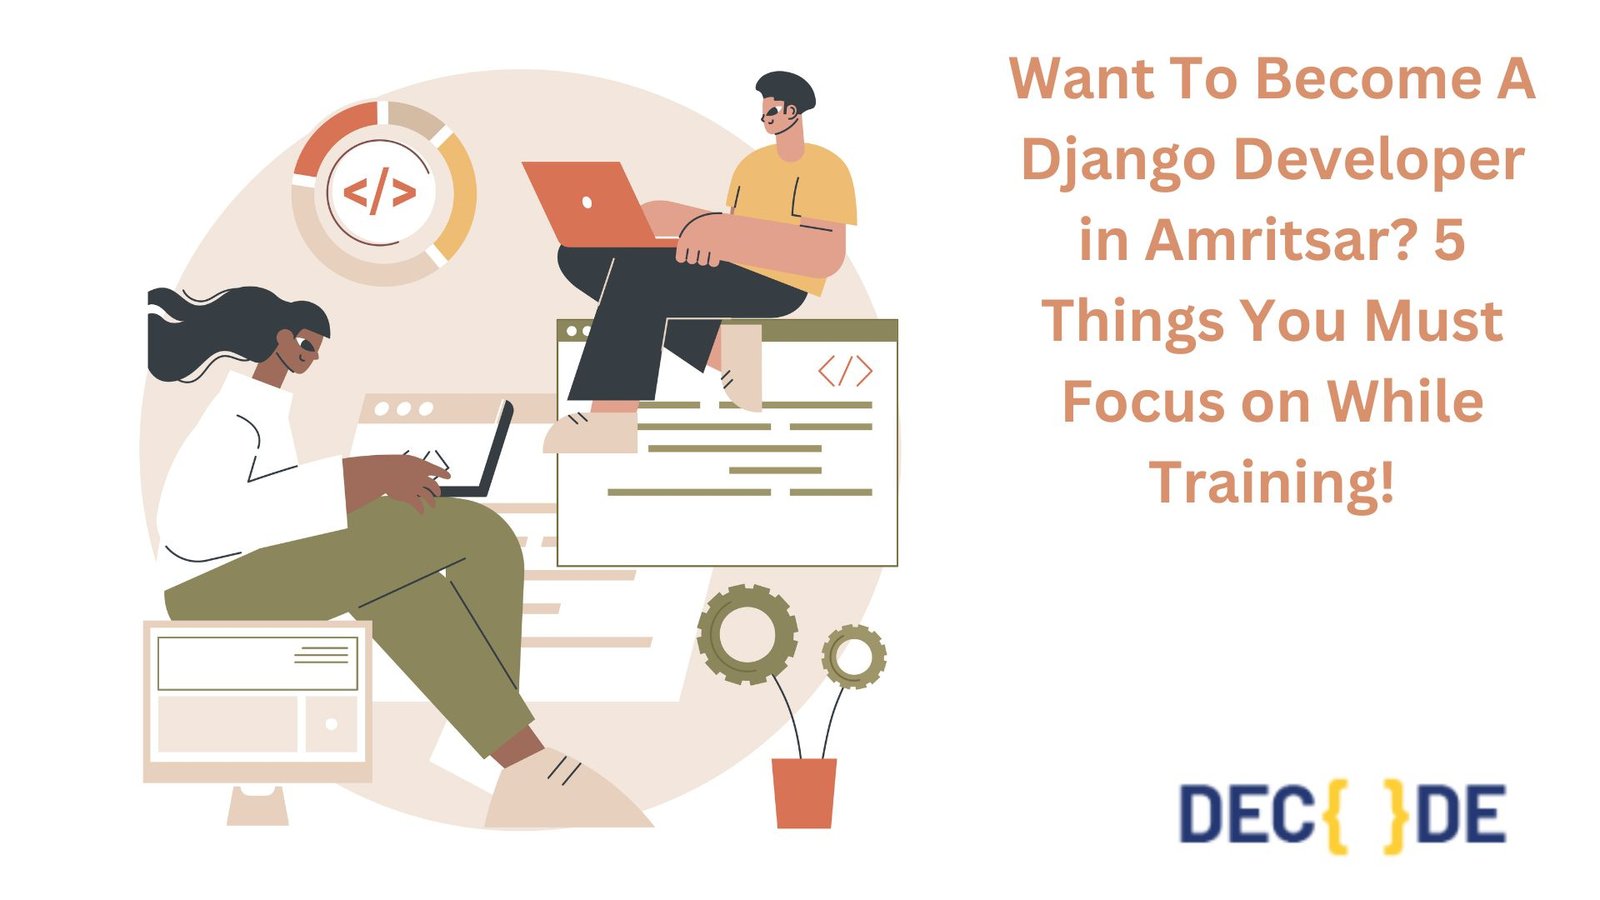 Want To Become A Django Developer in Amritsar? 5 Things You Must Focus on While Training!